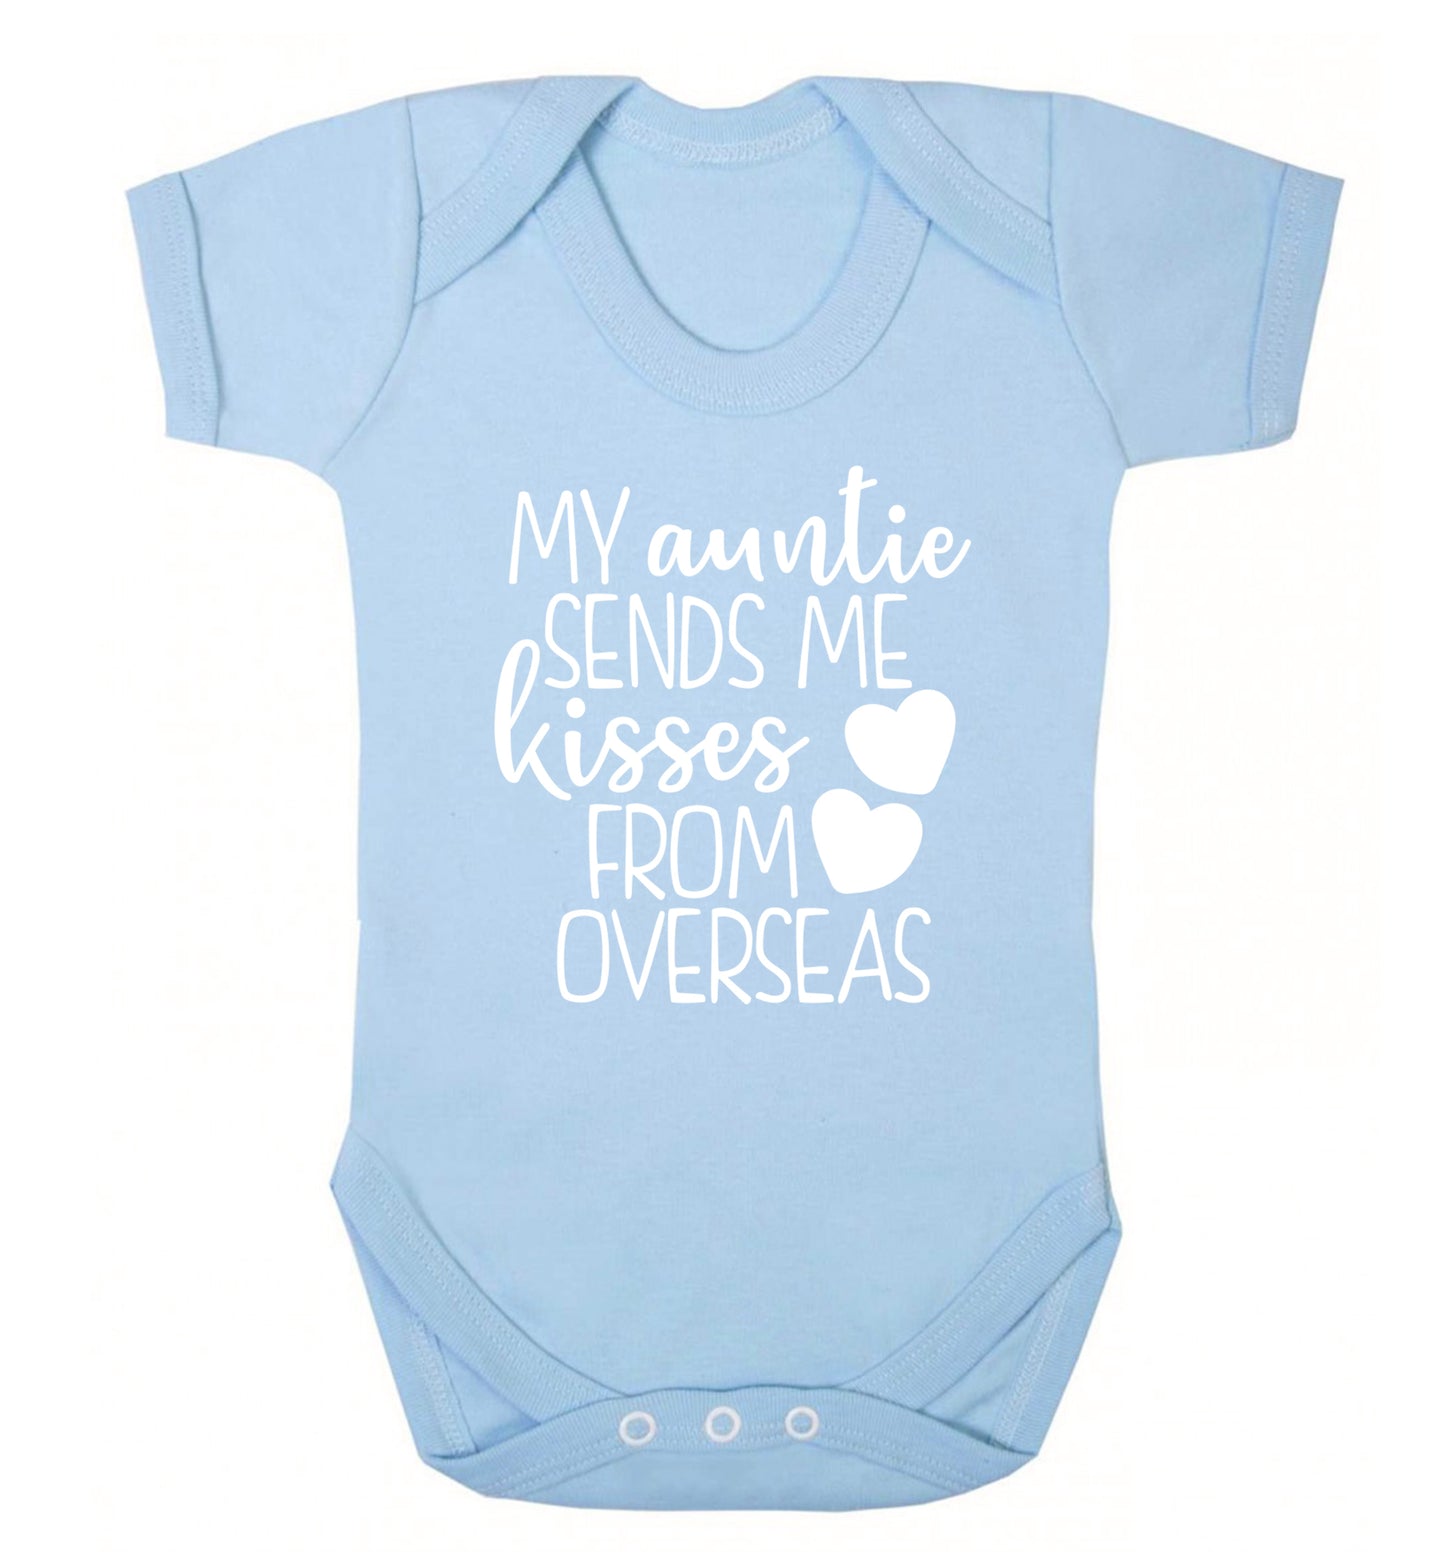 My auntie sends me kisses from overseas Baby Vest pale blue 18-24 months